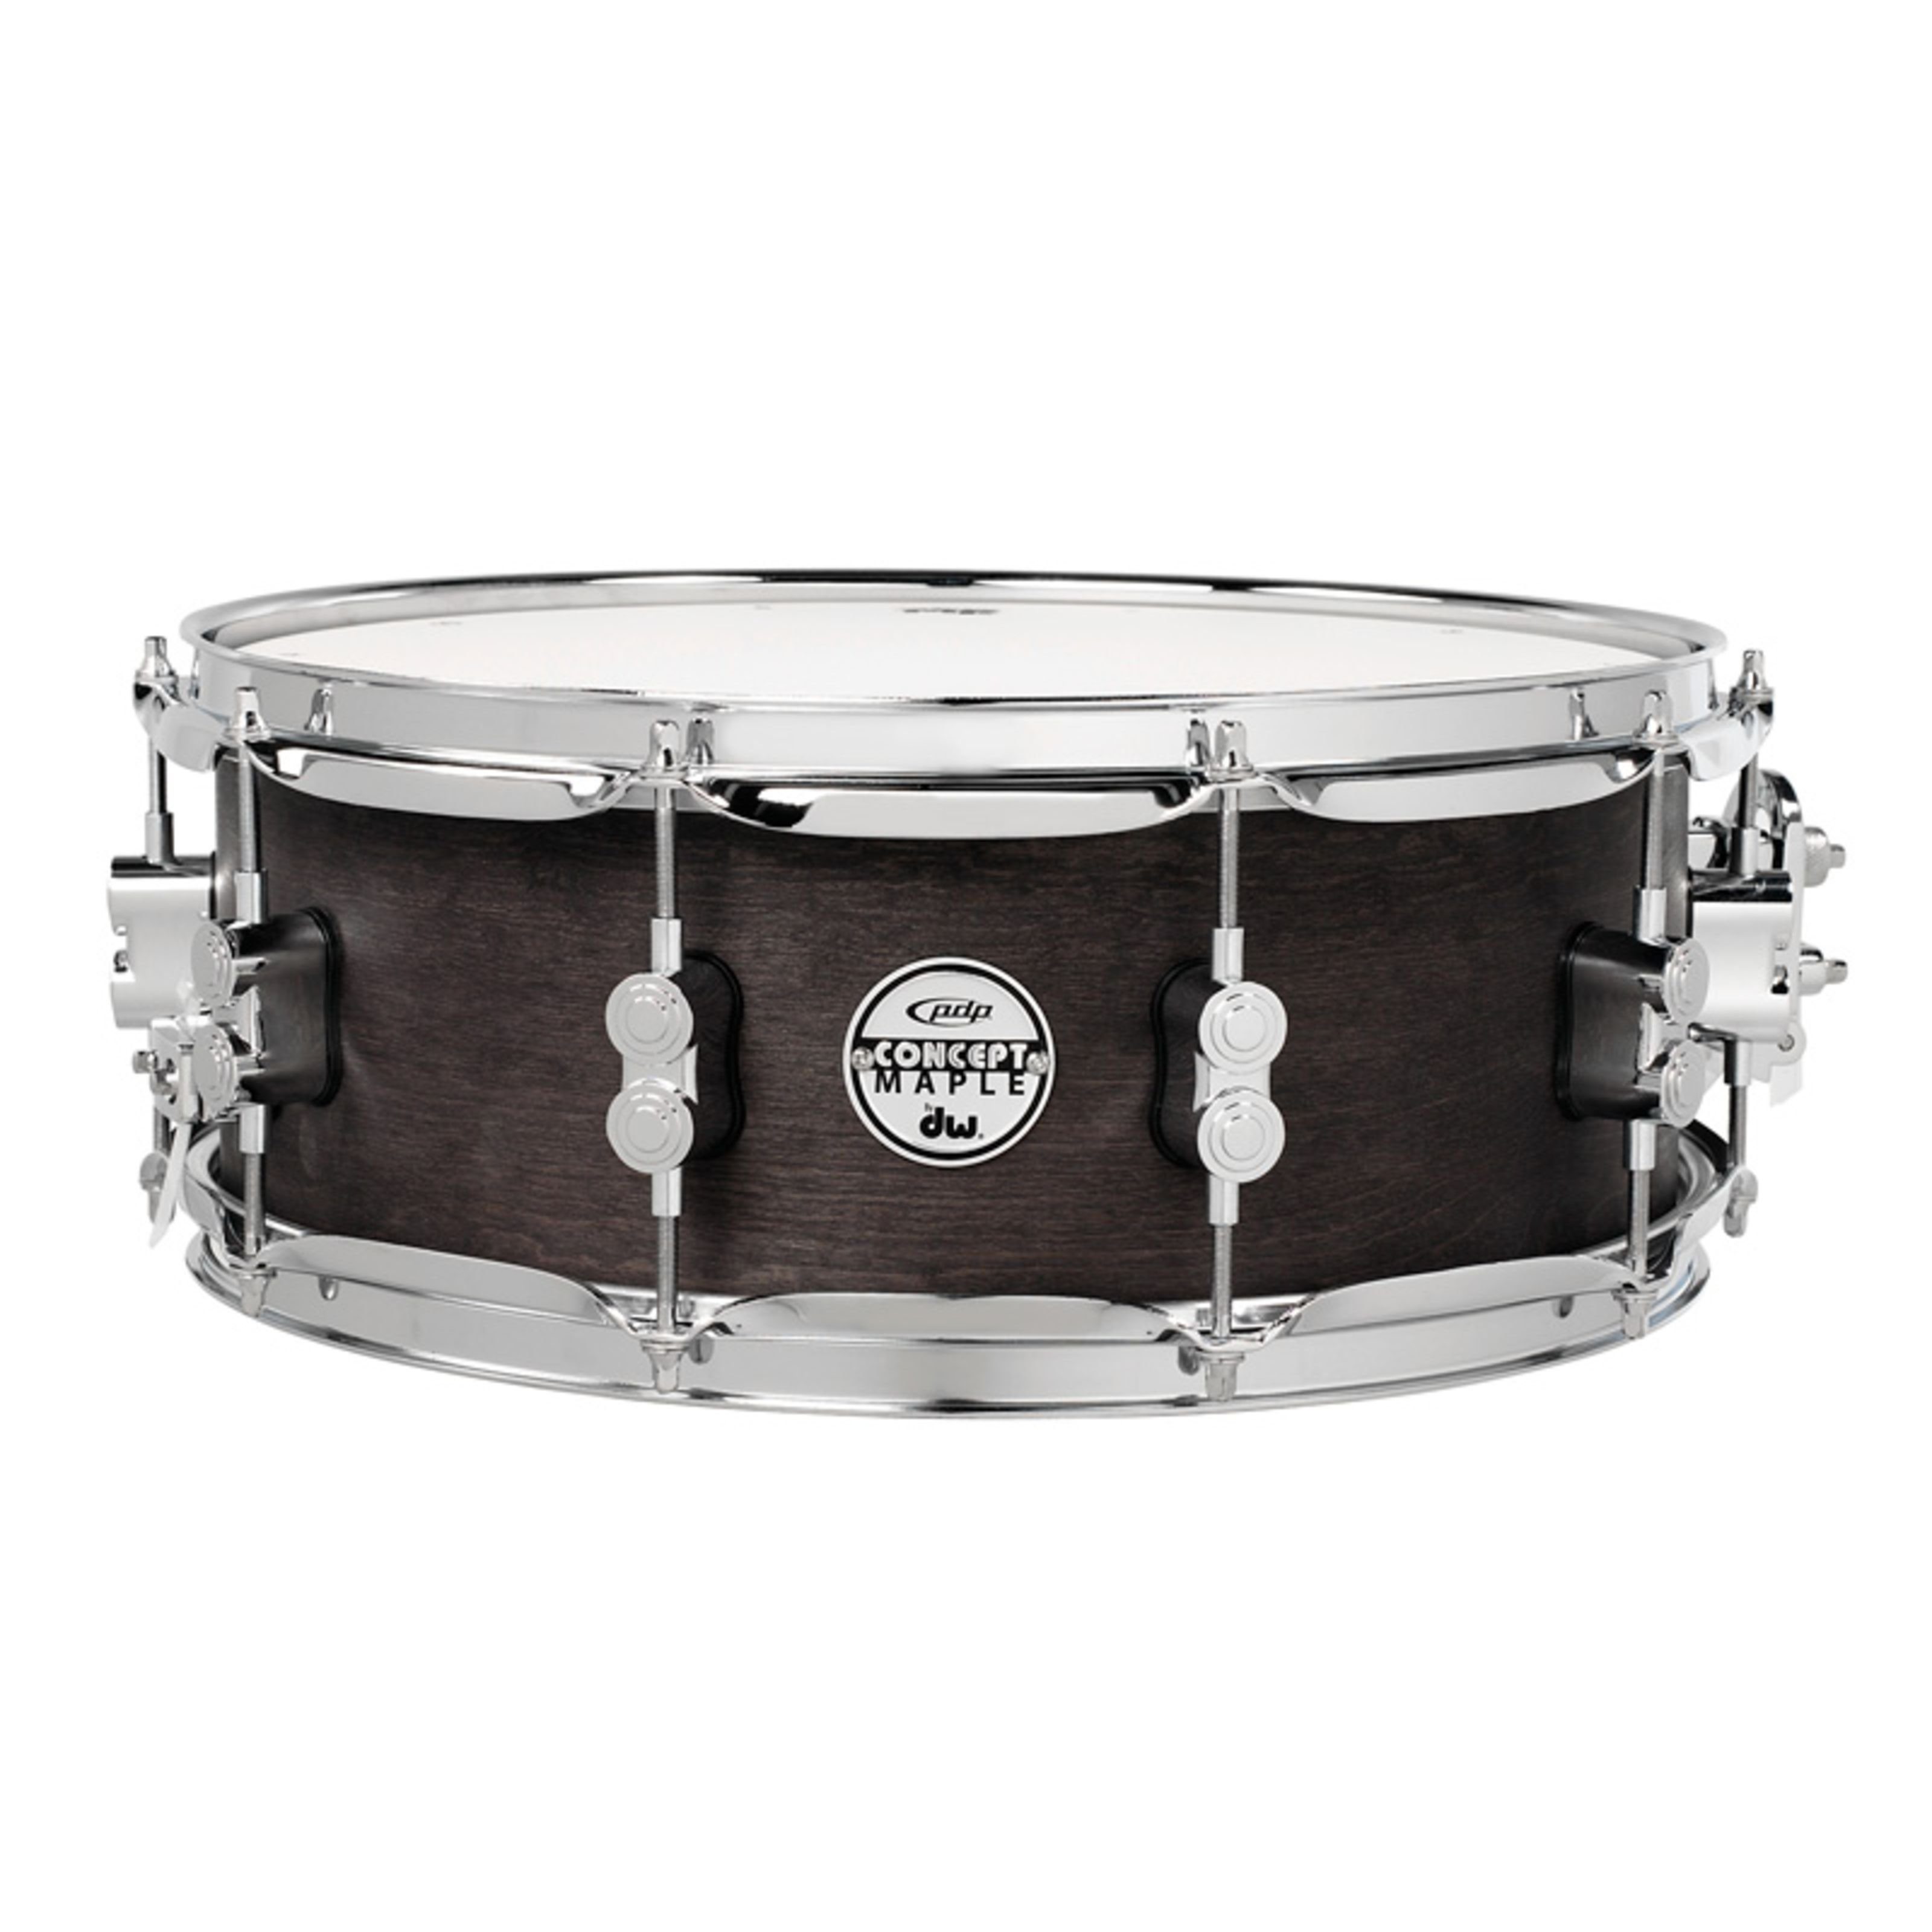 pdp Snare Drum,Black Wax Snare 14"x65", Schlagzeuge, Snare Drums, Black Wax Snare 14"x6,5" - Snare Drum